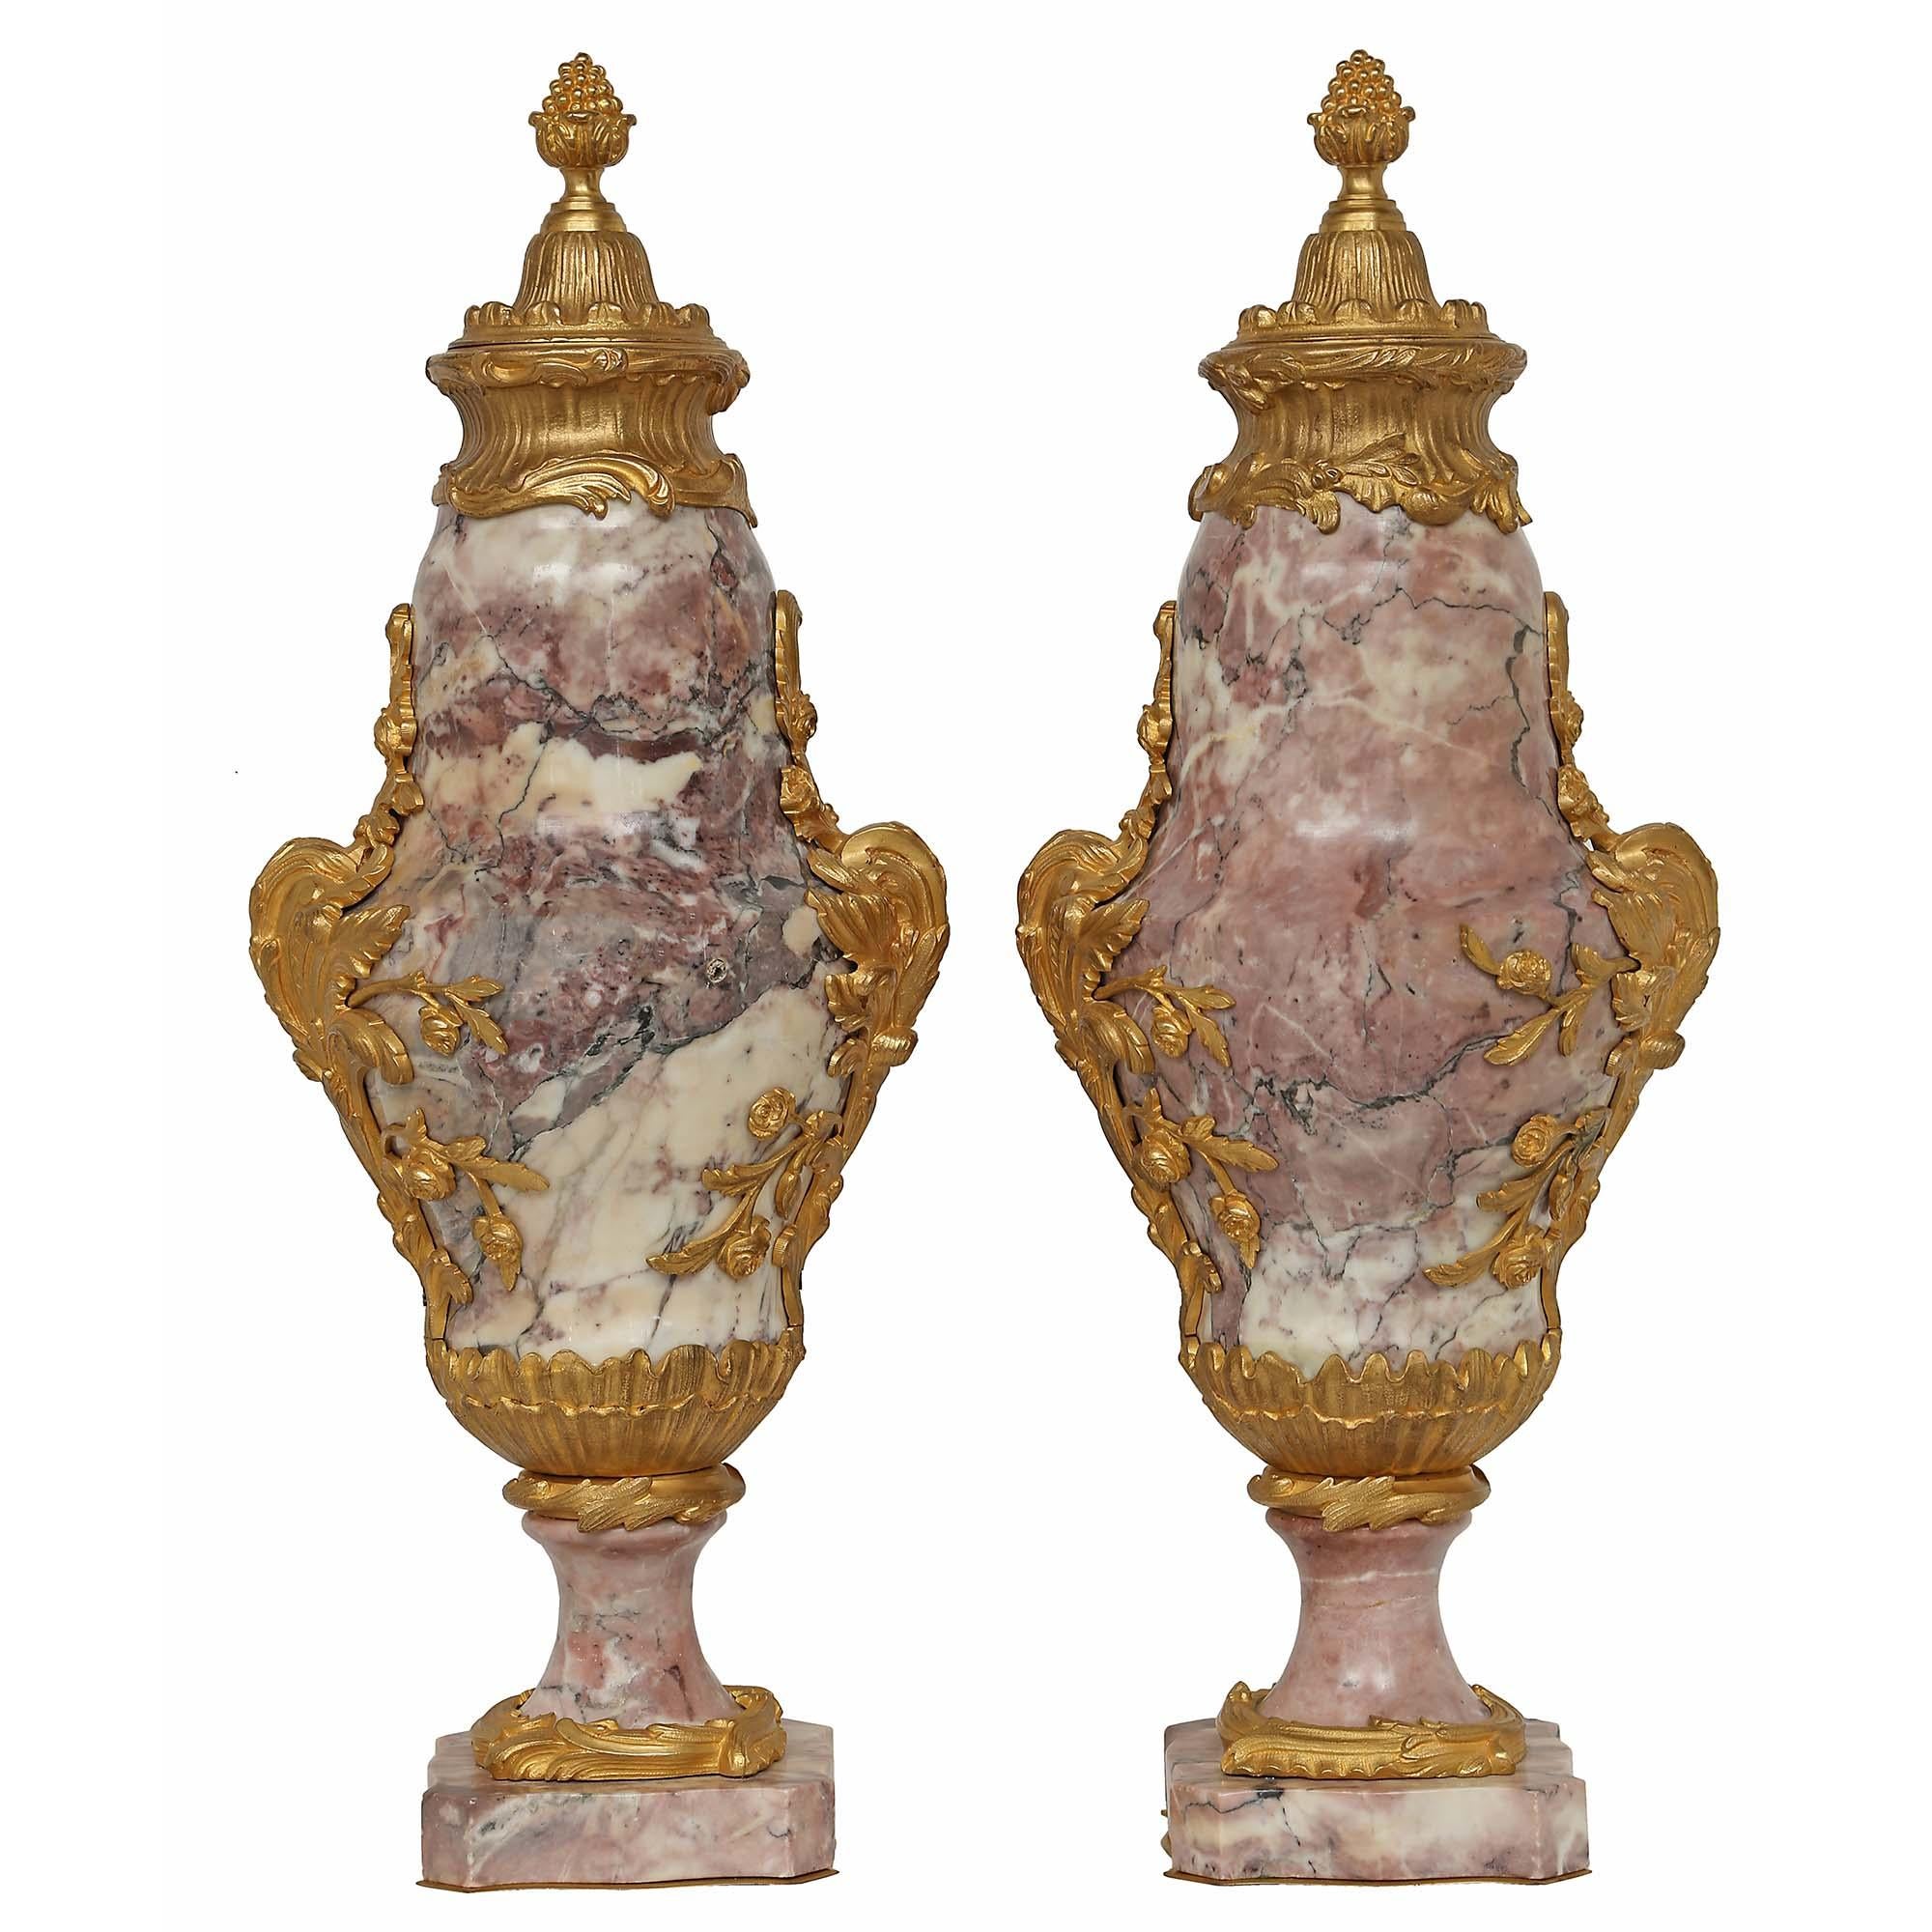 A pair of impressive French mid 19th century Louis XV st. ormolu and Bréche de Violette marble cassolettes. Each is raised on a square Bréche Violette marble base with concave corners and ormolu trim. The marble socle is adorned with an ormolu